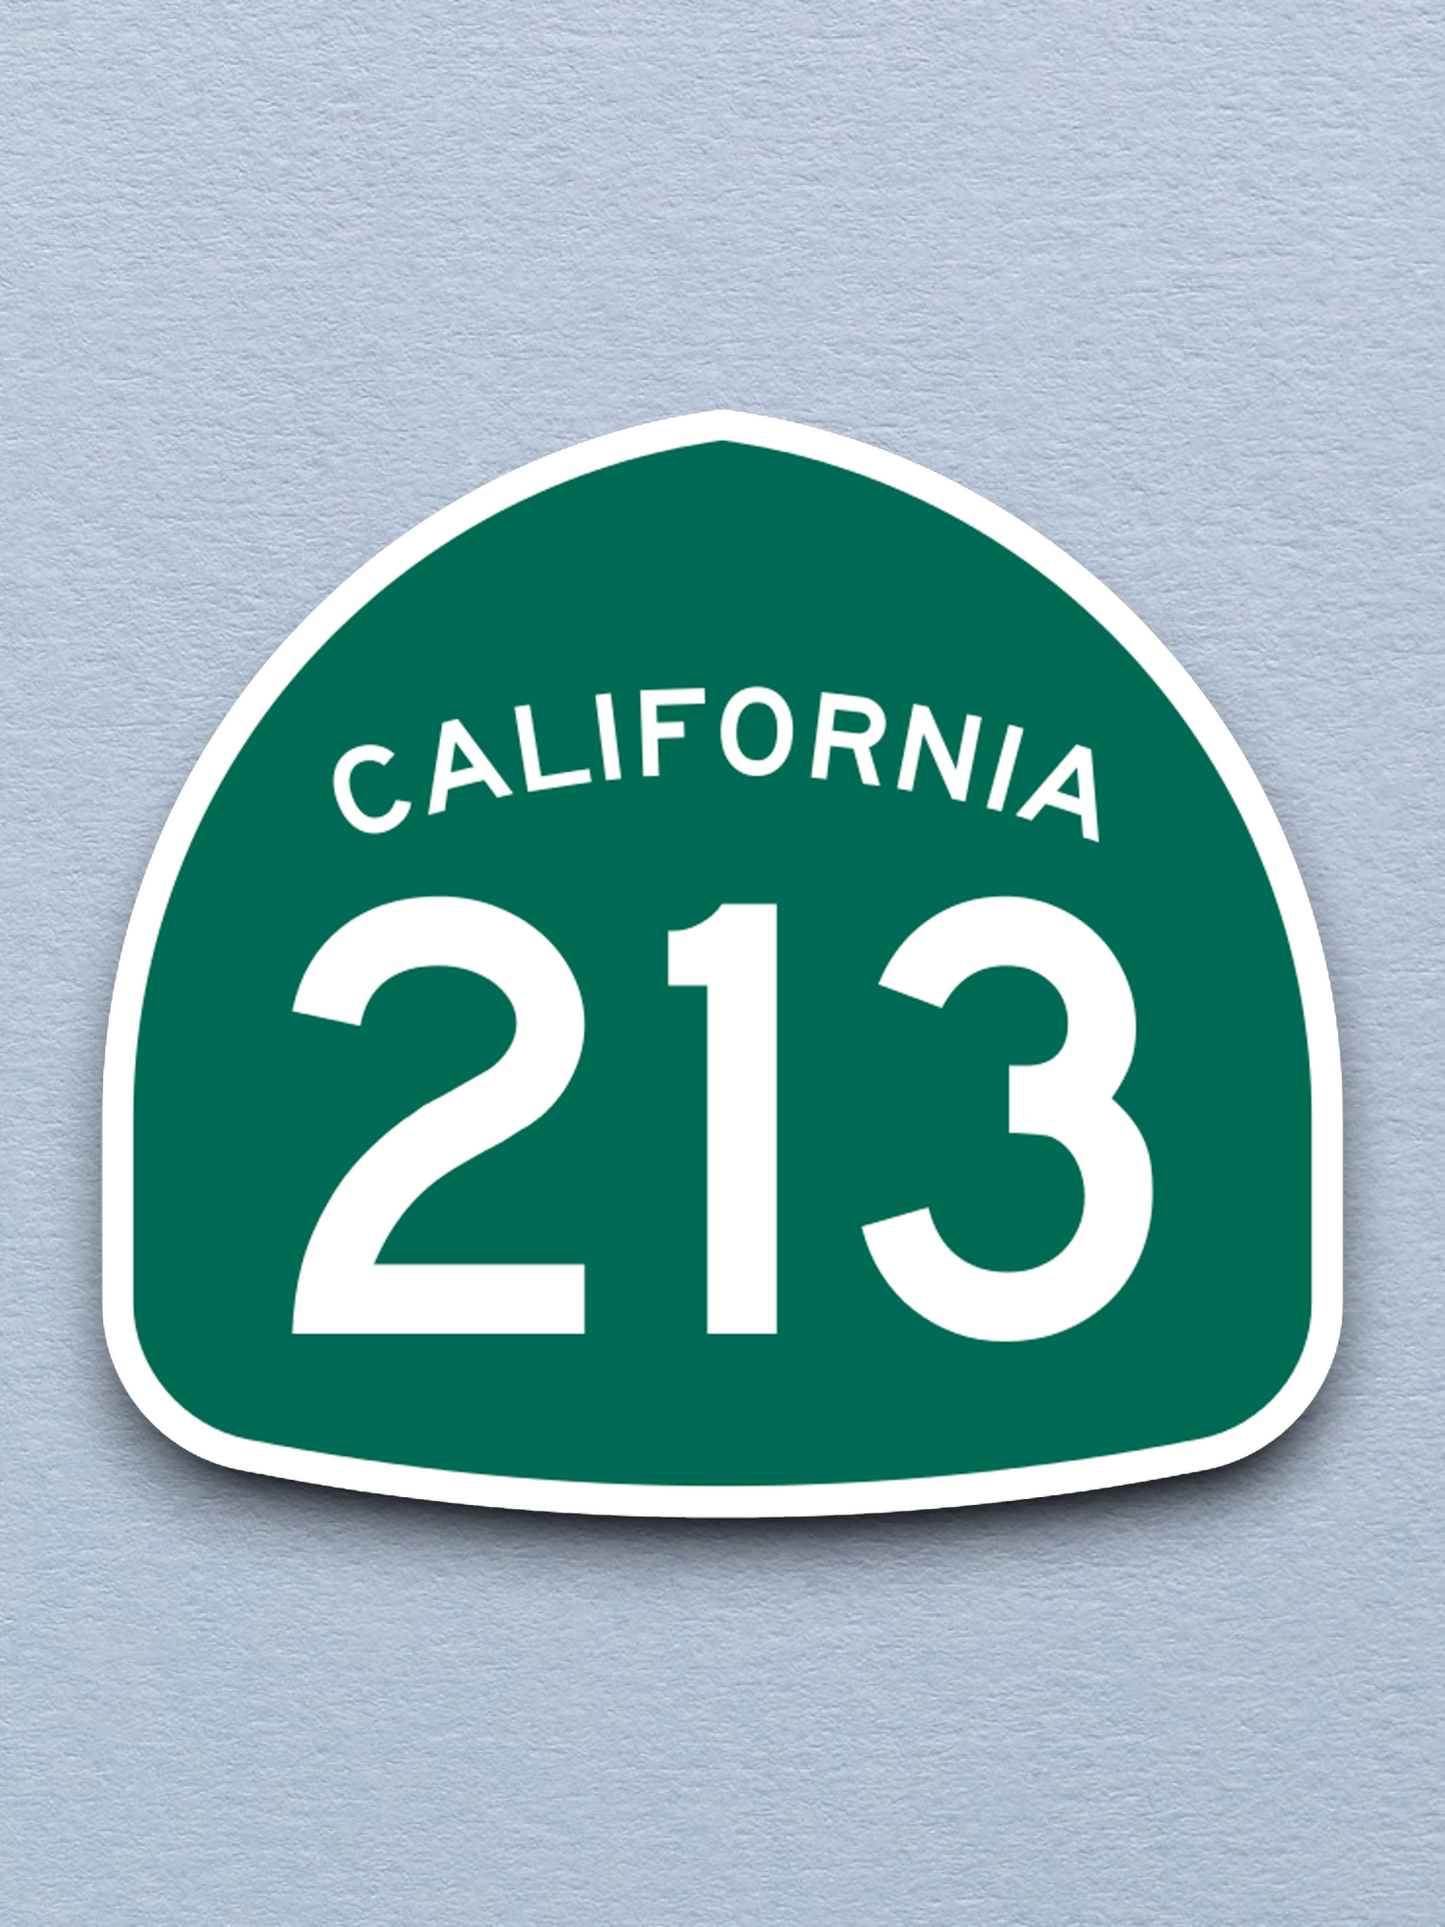 California State Route 213 Road Sign Sticker